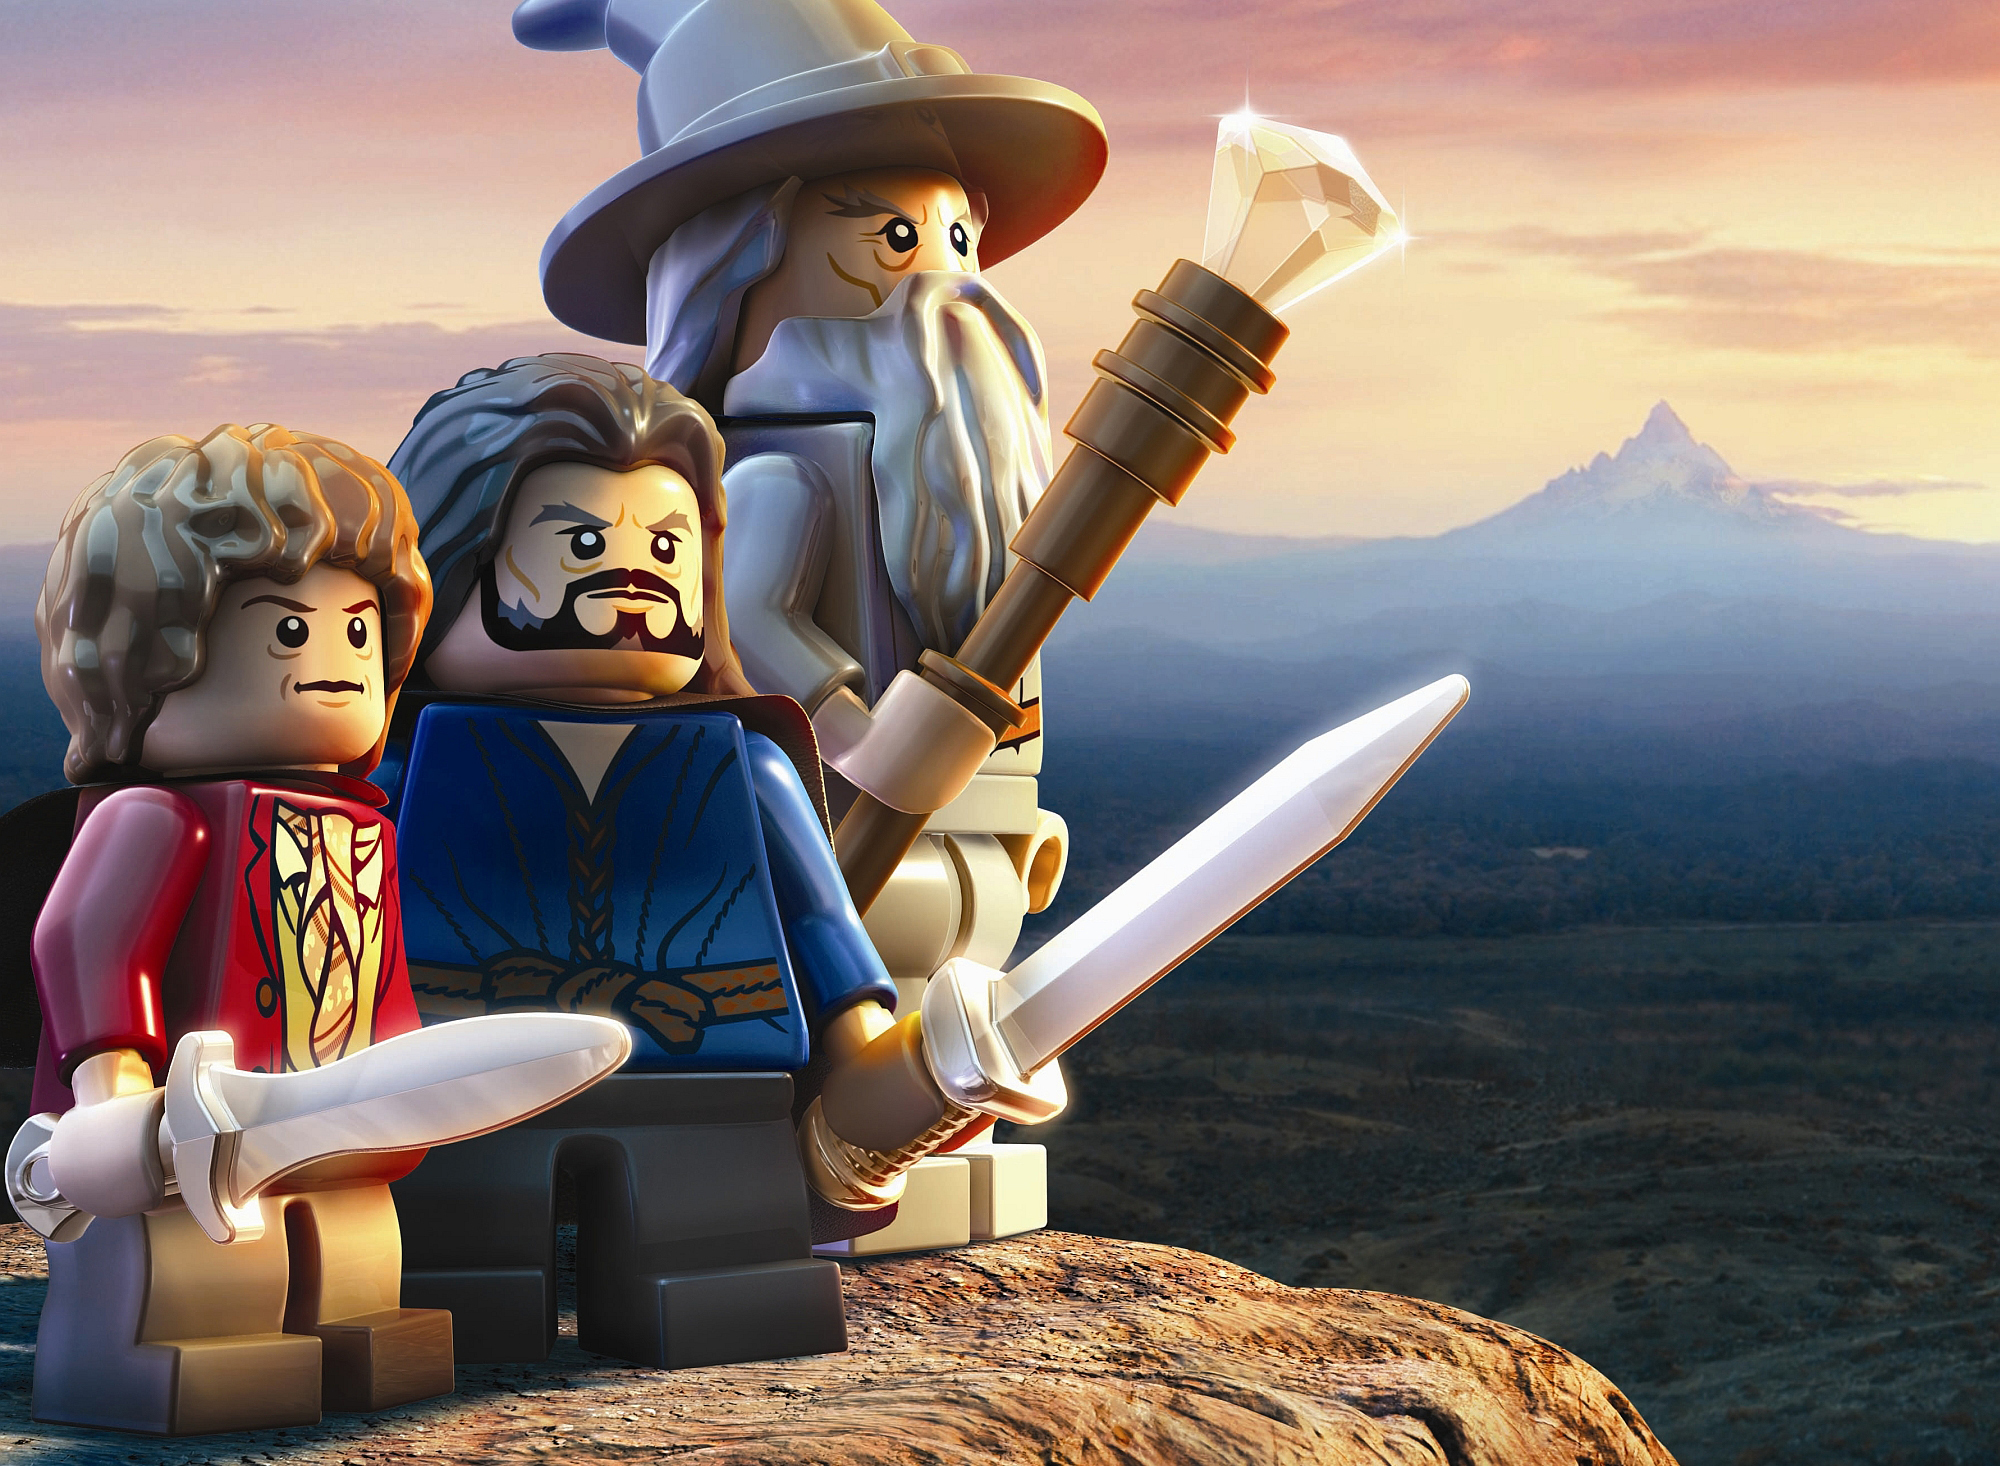 New Lock Screen Wallpapers hobbit, products, lego, bilbo baggins, gandalf, lord of the rings, staff, wizard